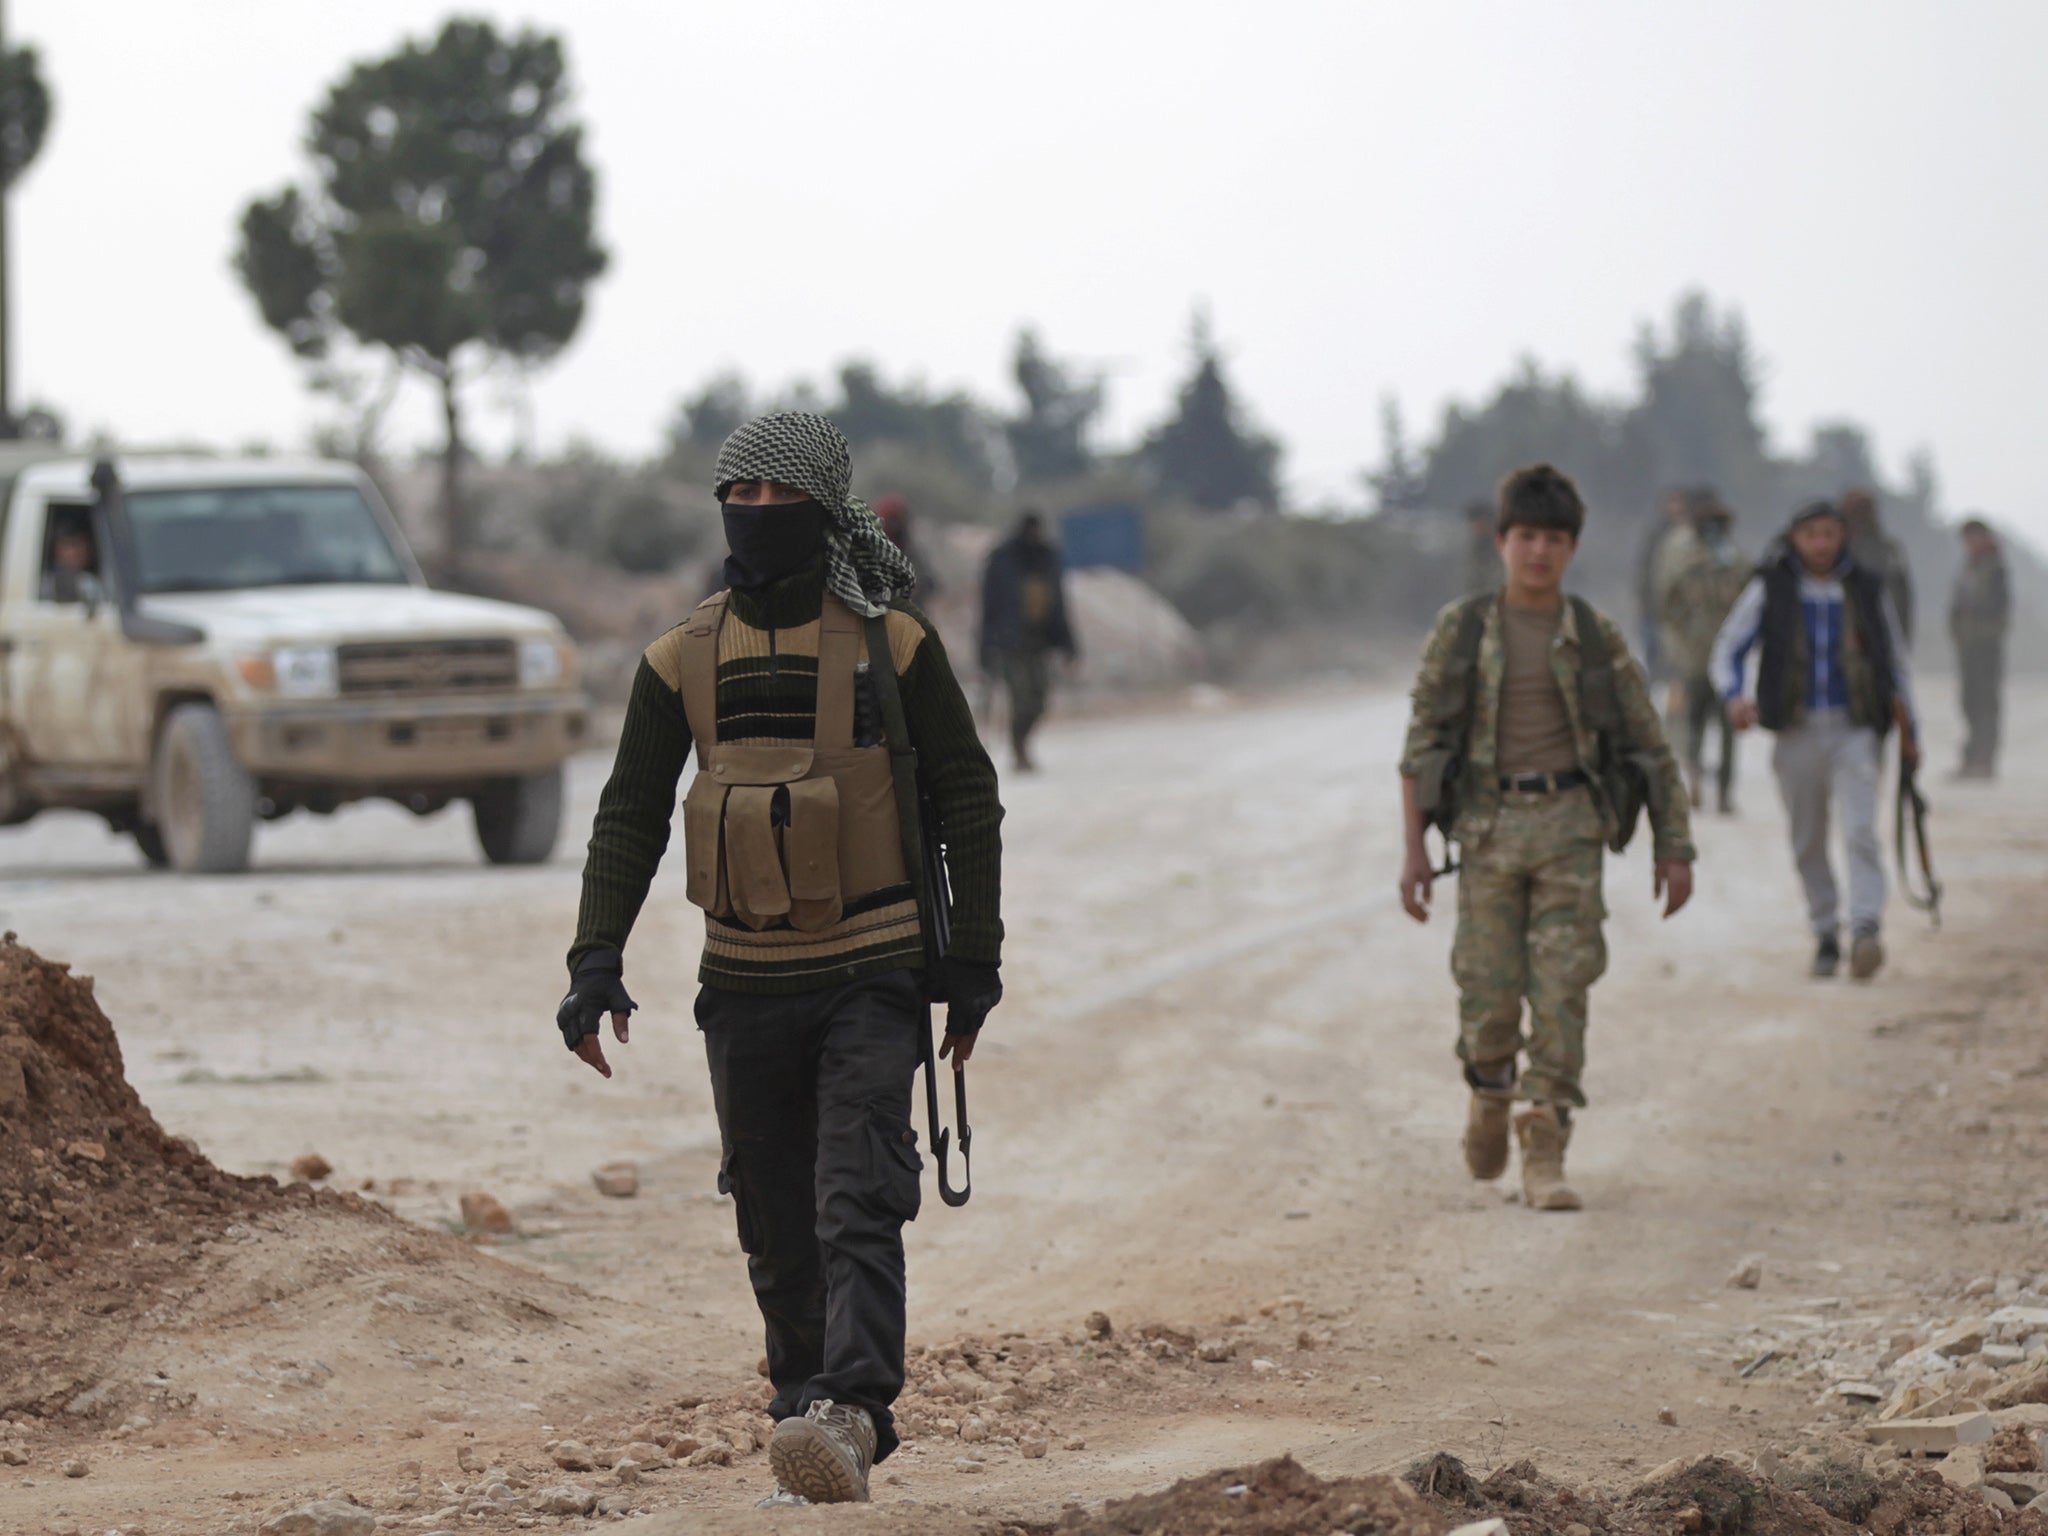 Free Syrian Army fighters on the outskirts of the Isis-controlled northern Syrian town of al-Bab